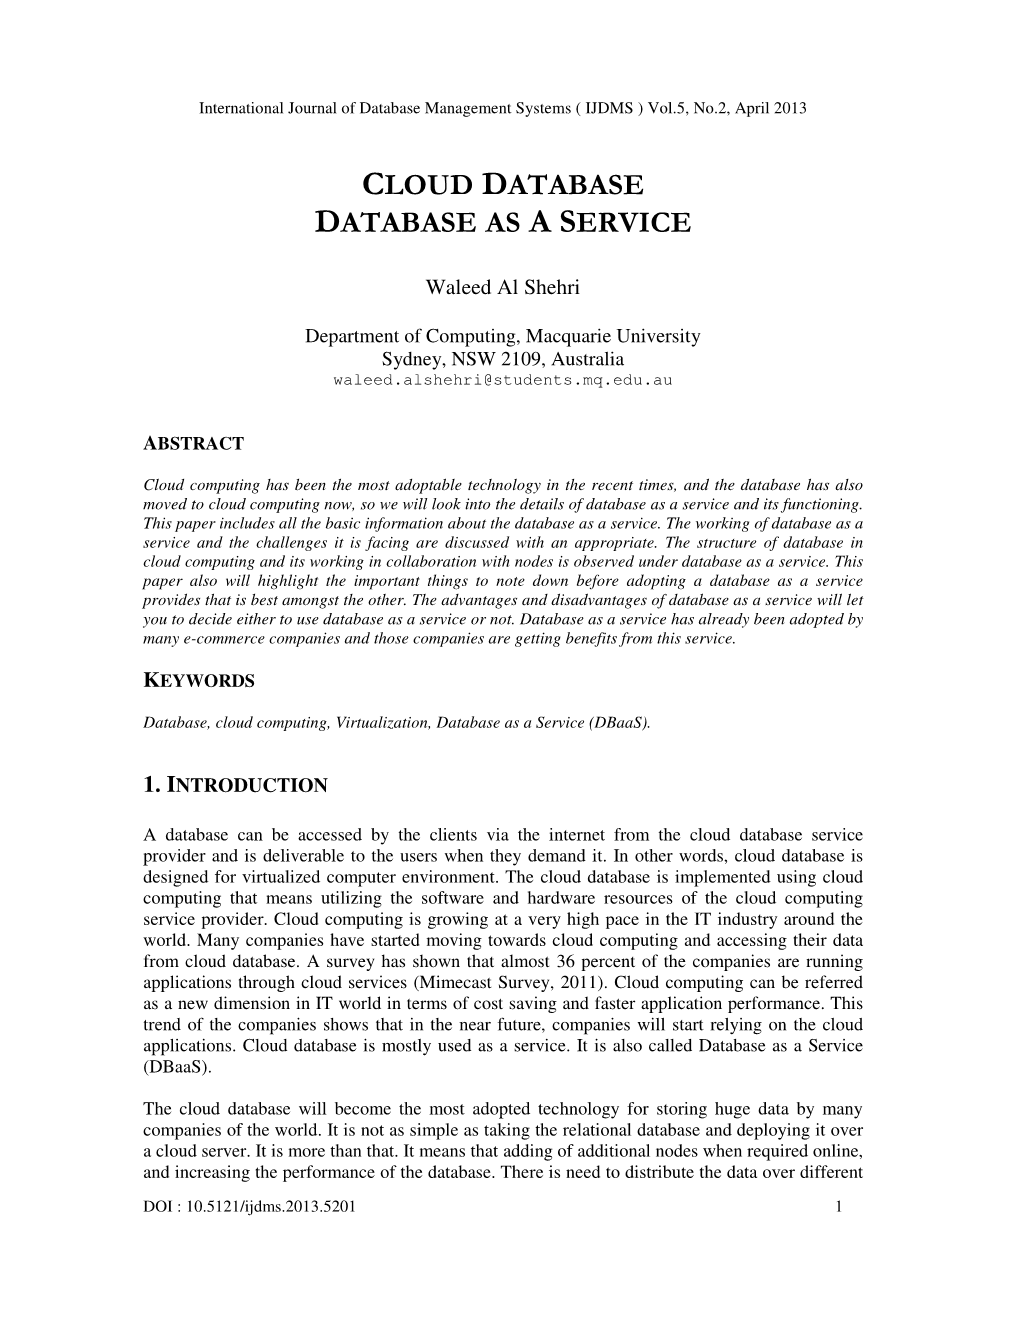 Cloud Database Database As a Service